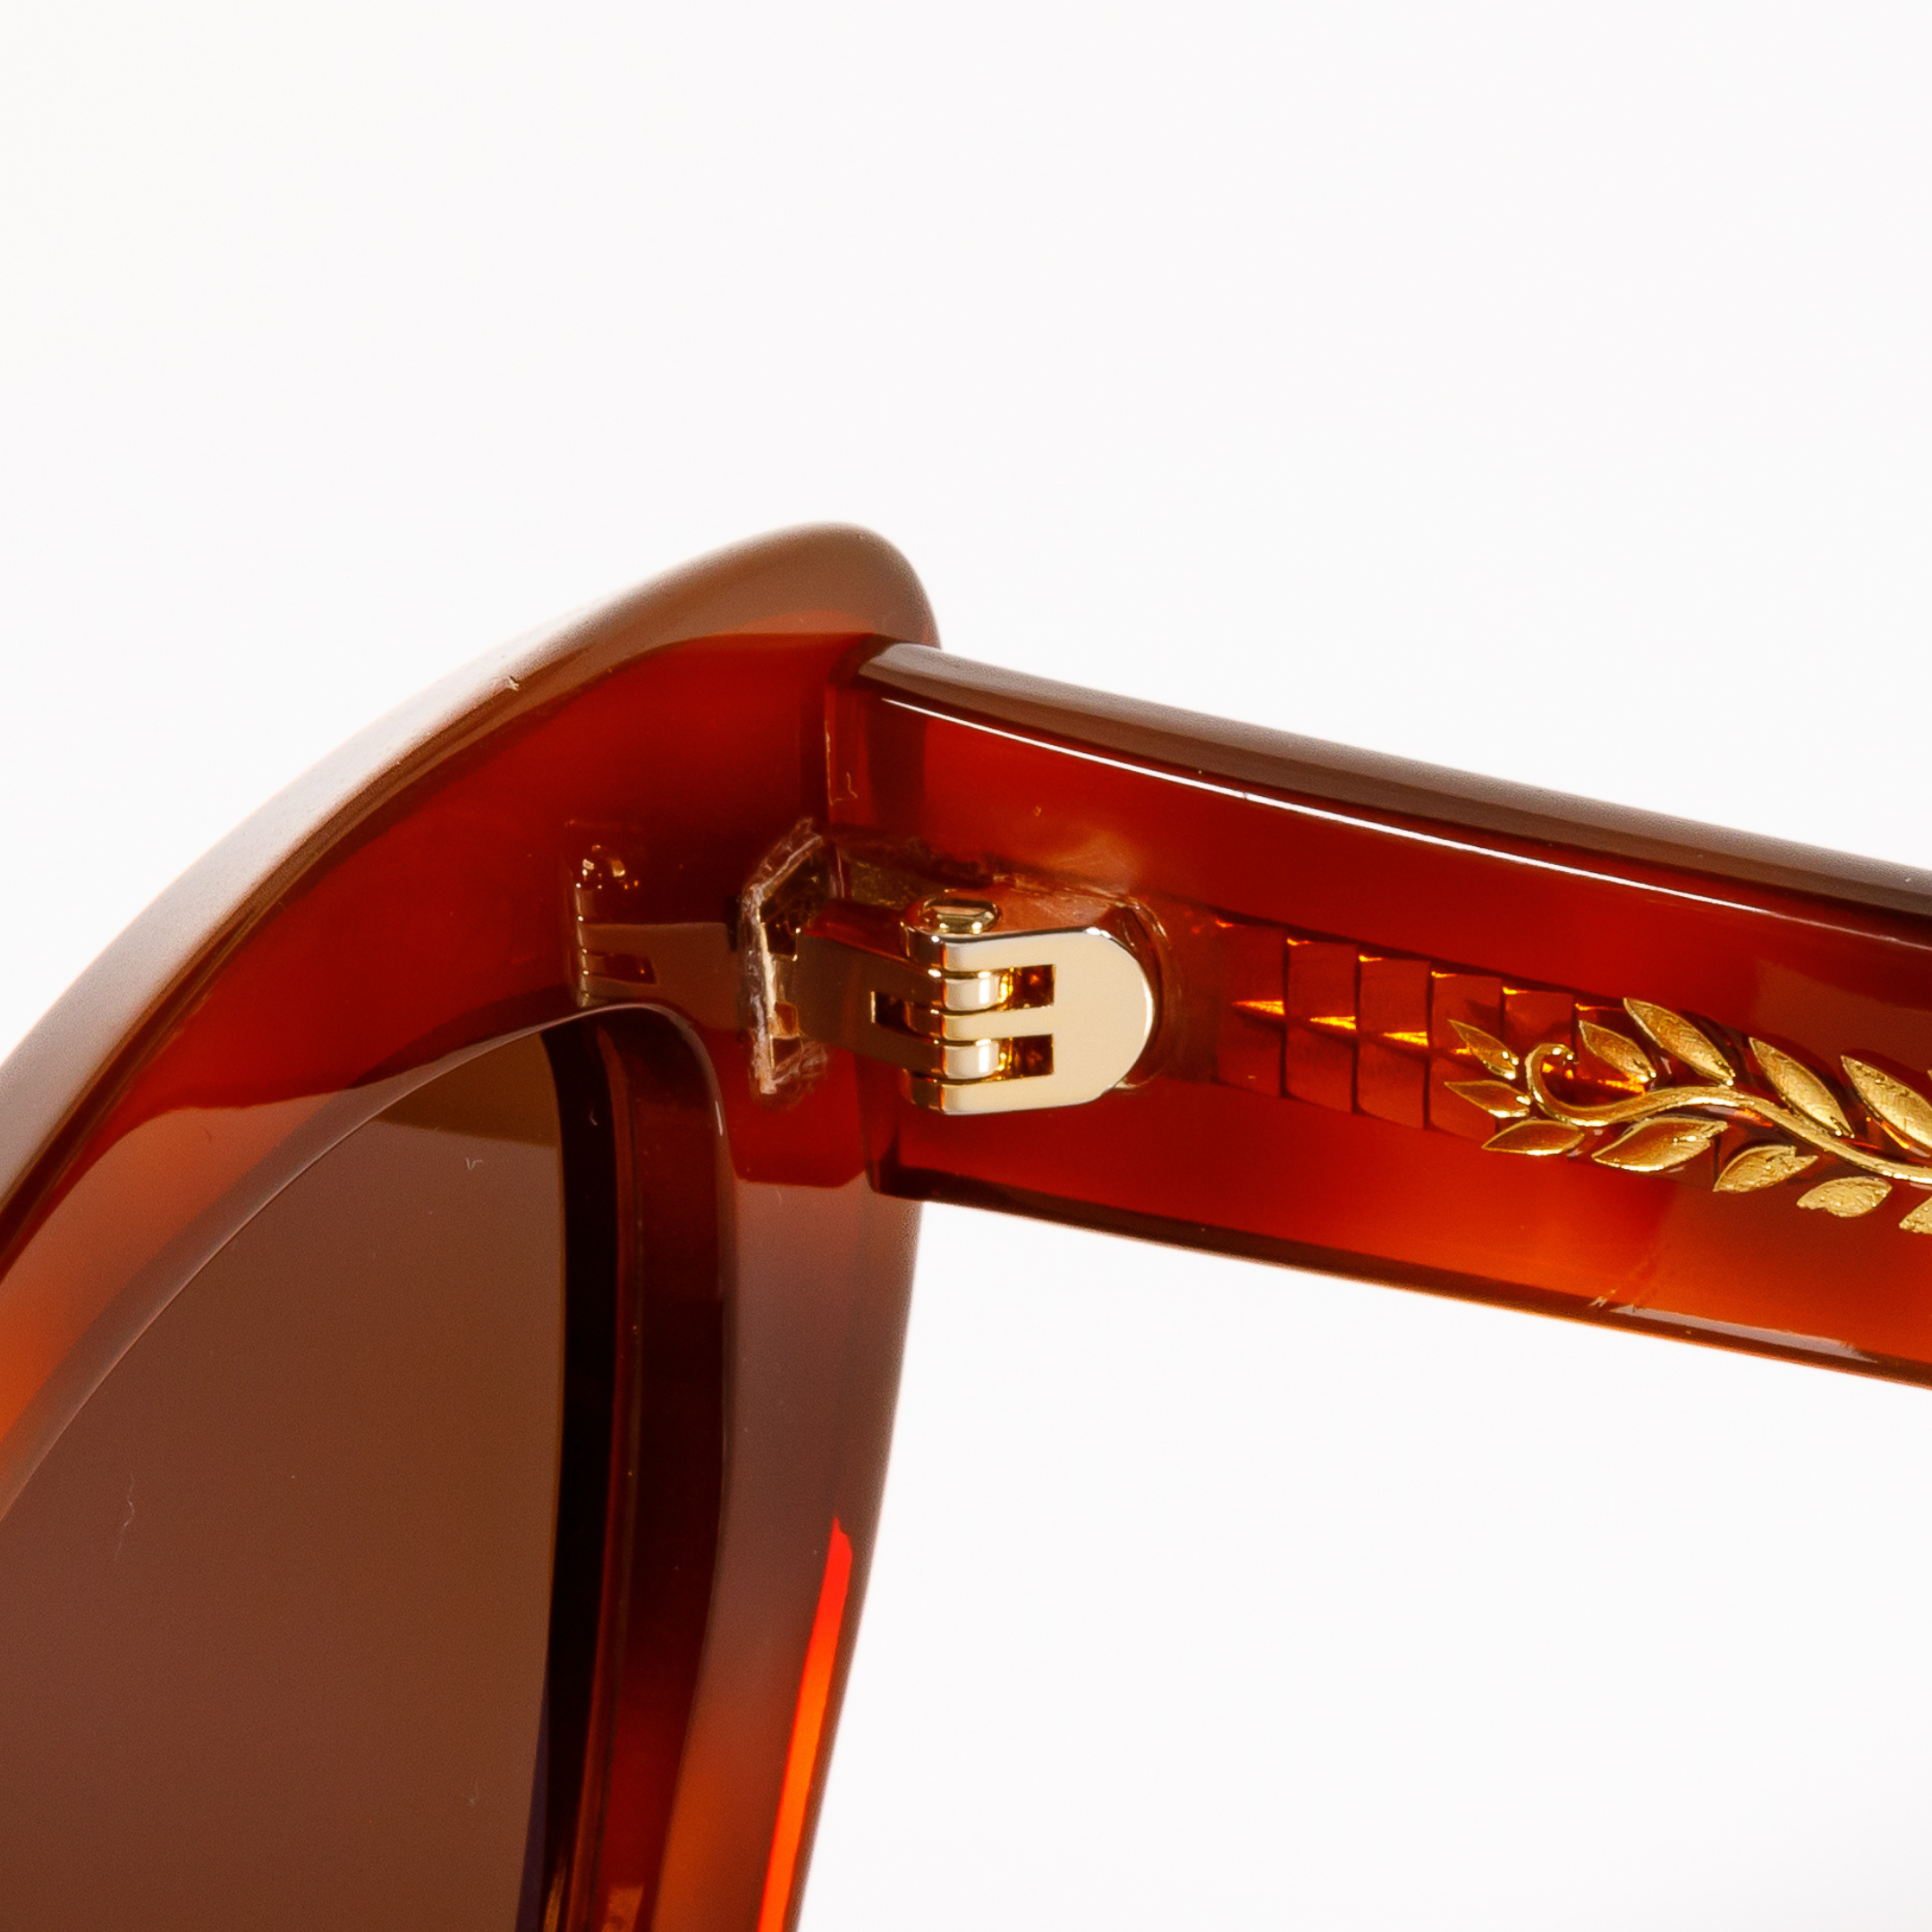 Macro view of the high quality OBE hinges used in the Memorí cat eye small fit sunglasses